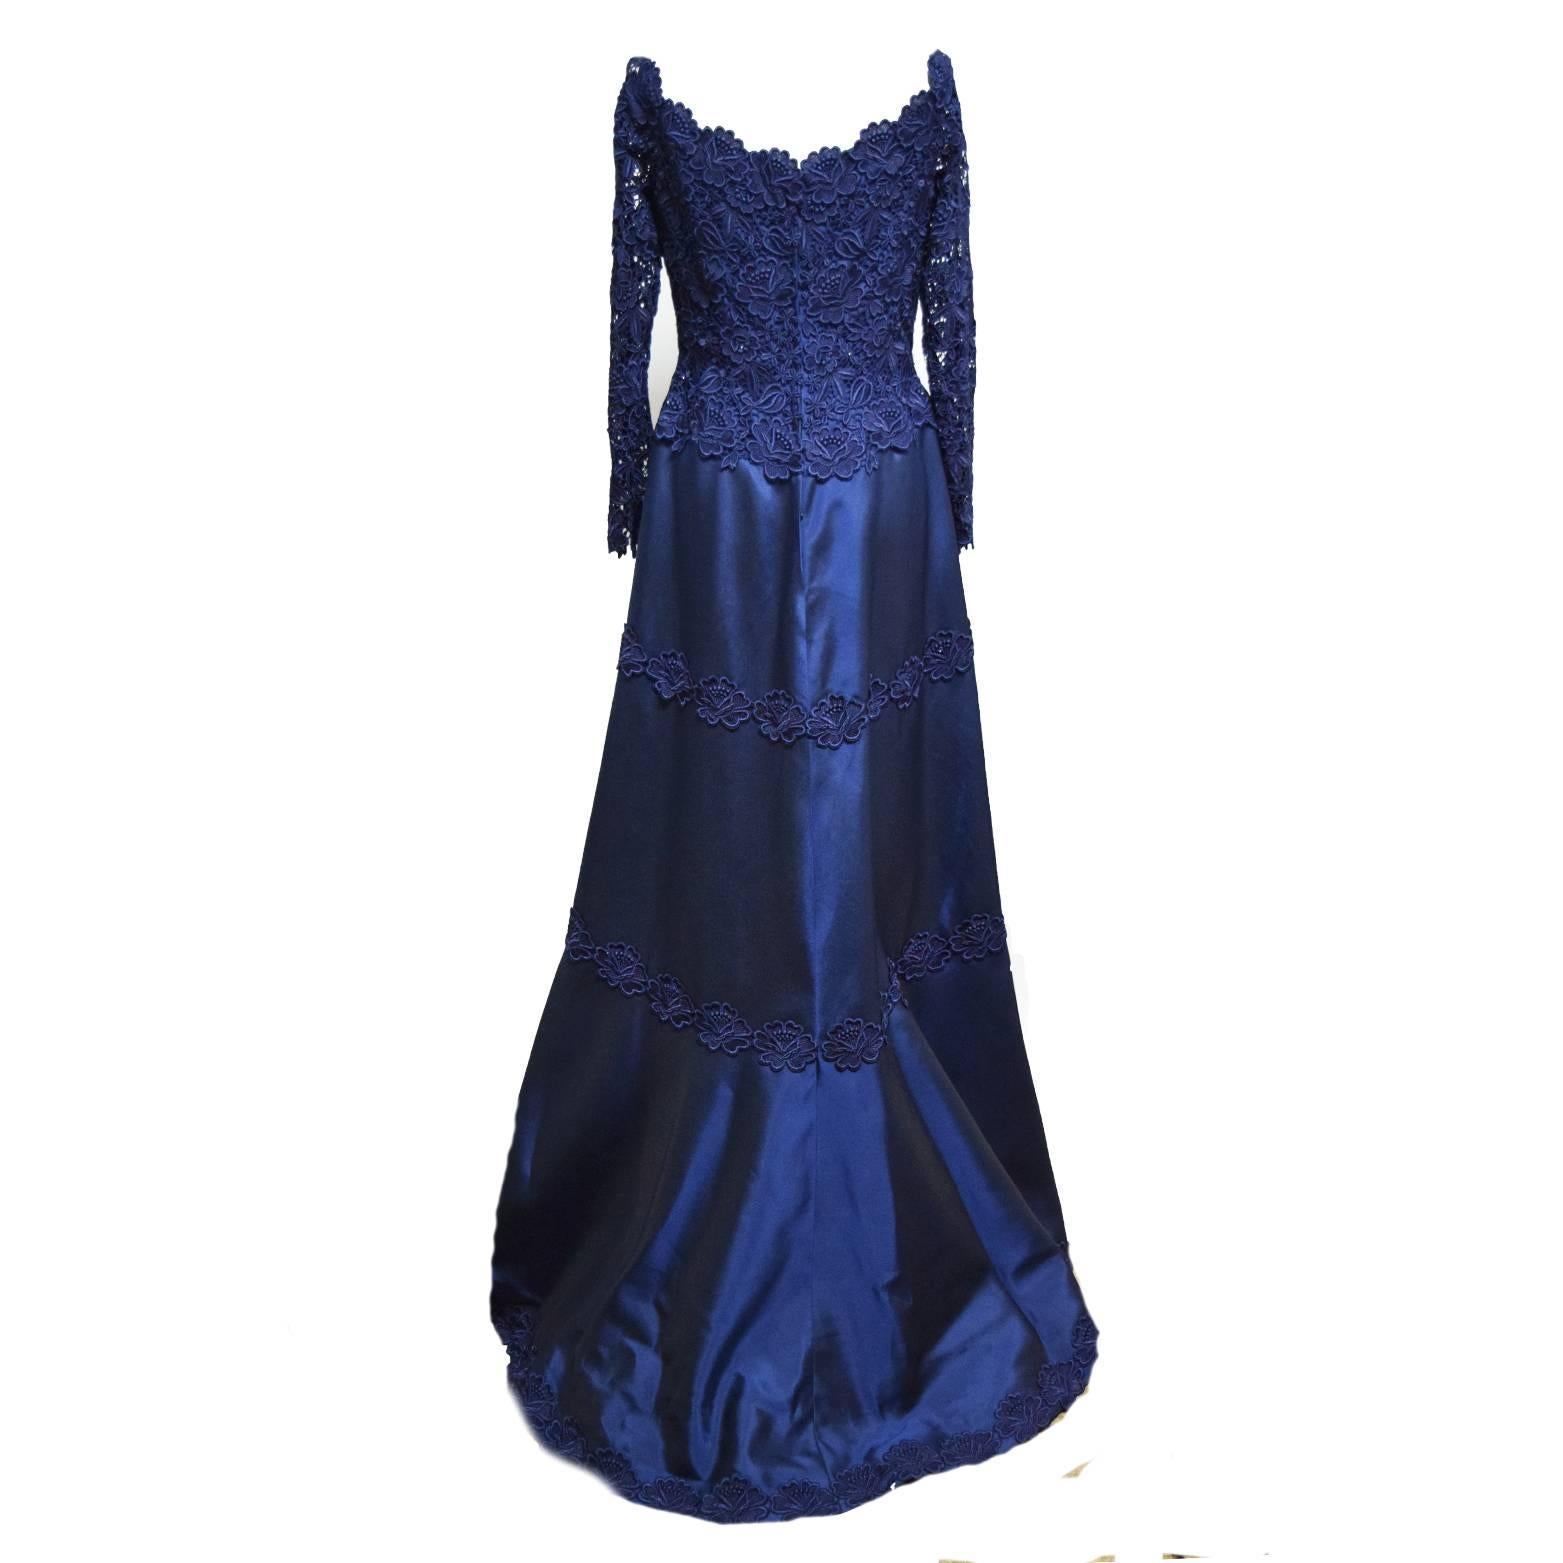 Helen Morley Navy Blue Off the Shoulder Evening Gown, Guipure Fitted Bodice and Long Sleeves, A Line Skirt with Three  Rows of Guipure Lace with the Third Row placed at the hemline, skirt has a sophisticated back train, Back Zipper Closure.